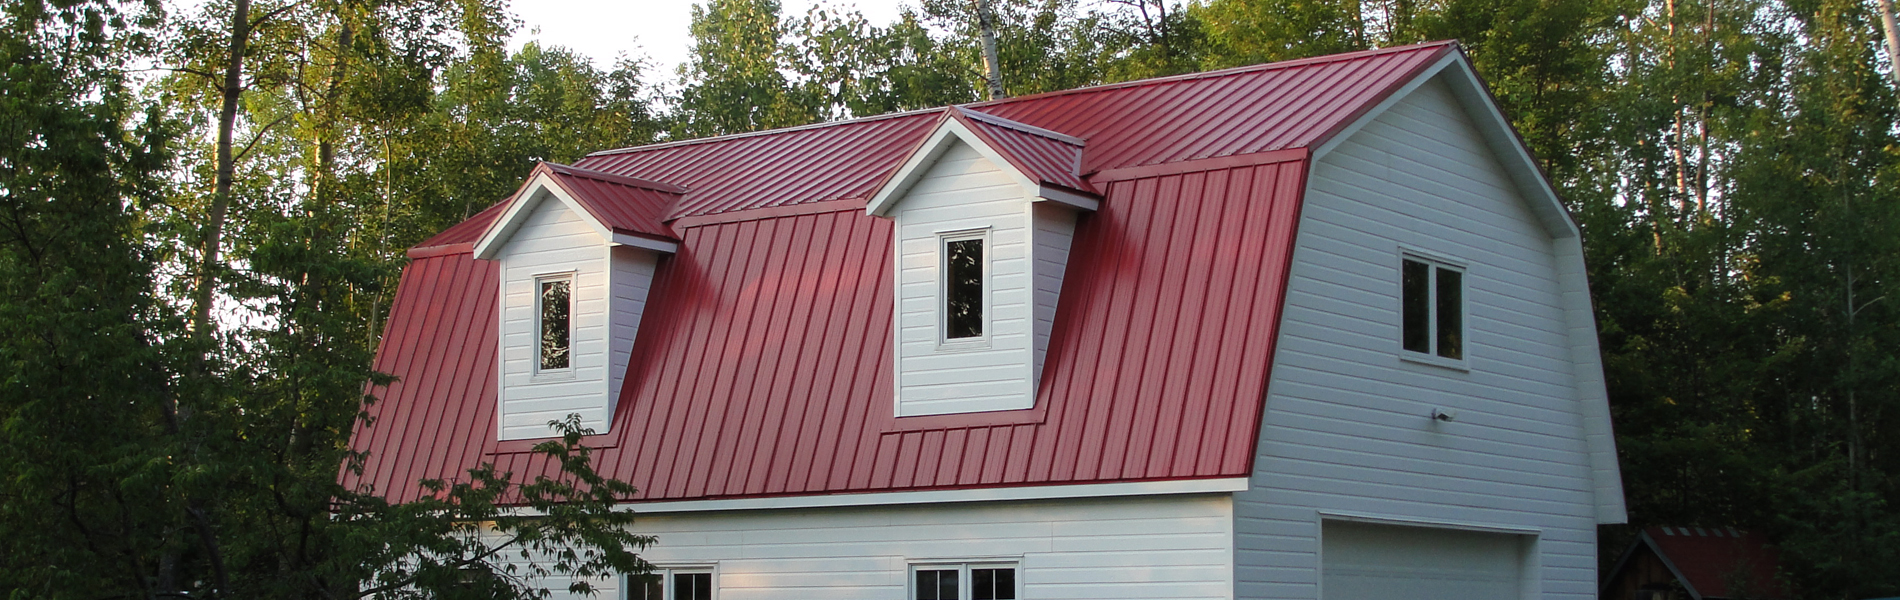 White Top Roofing Inc